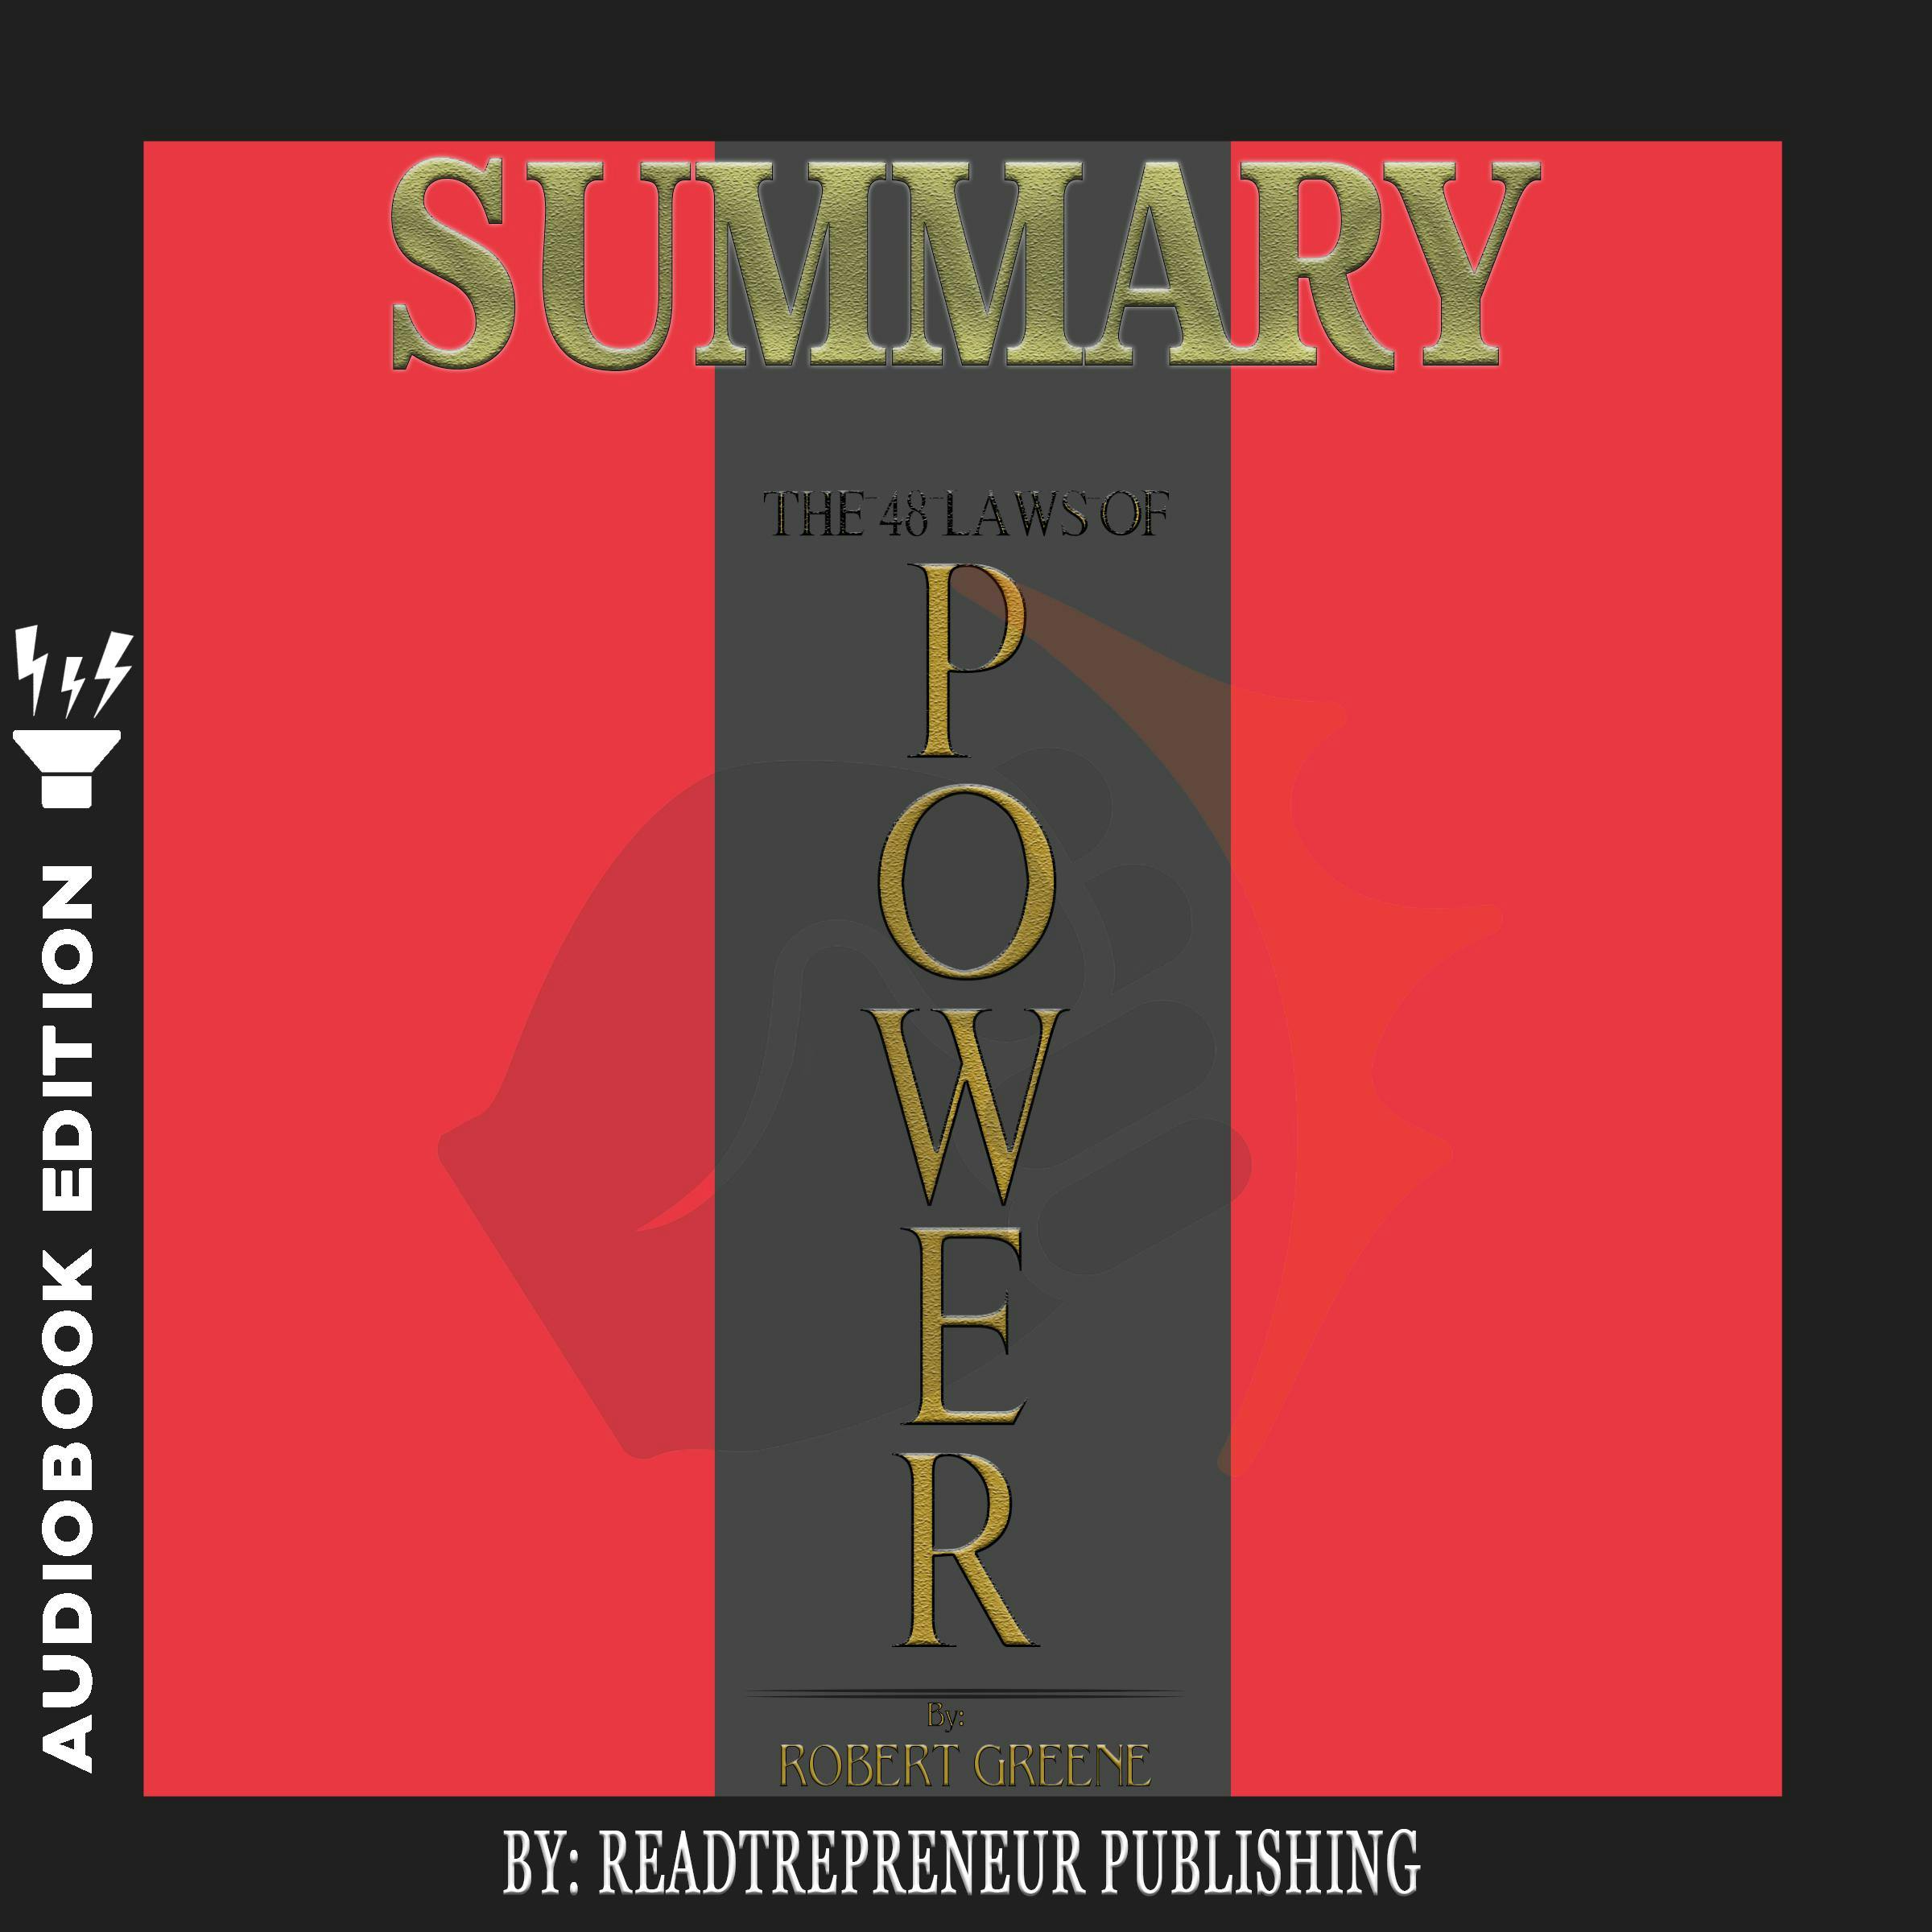 Book Summary: The 48 Laws of Power by Robert Greene